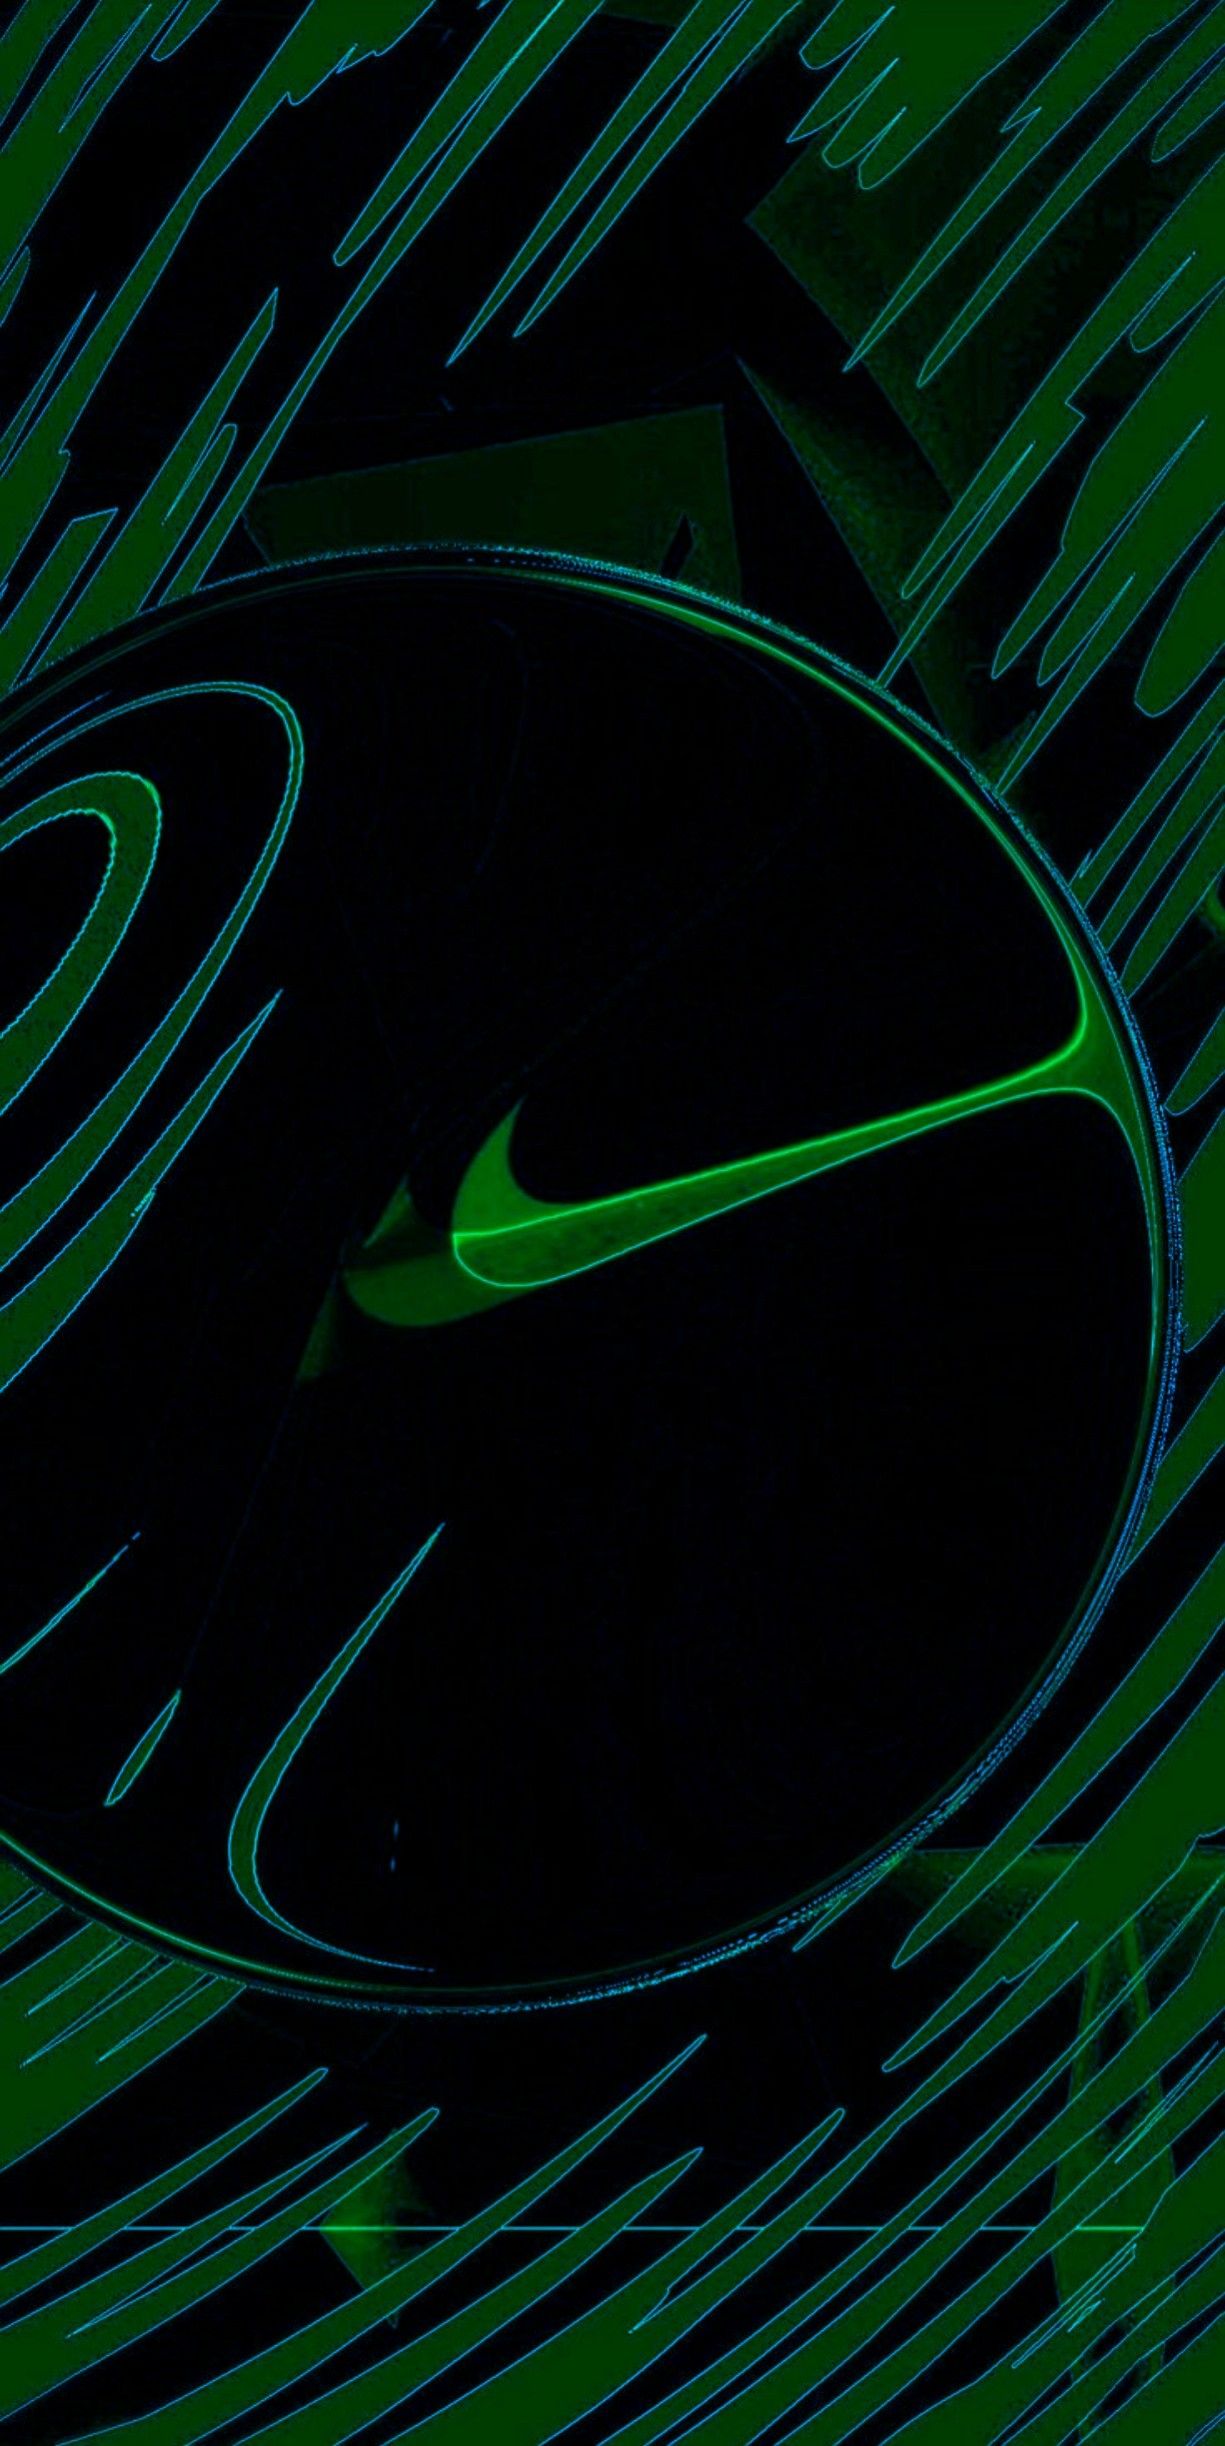 Pin by hooters konceptz on nike wallpaper nike wallpaper nike wallpaper iphone jordan logo wallpaper